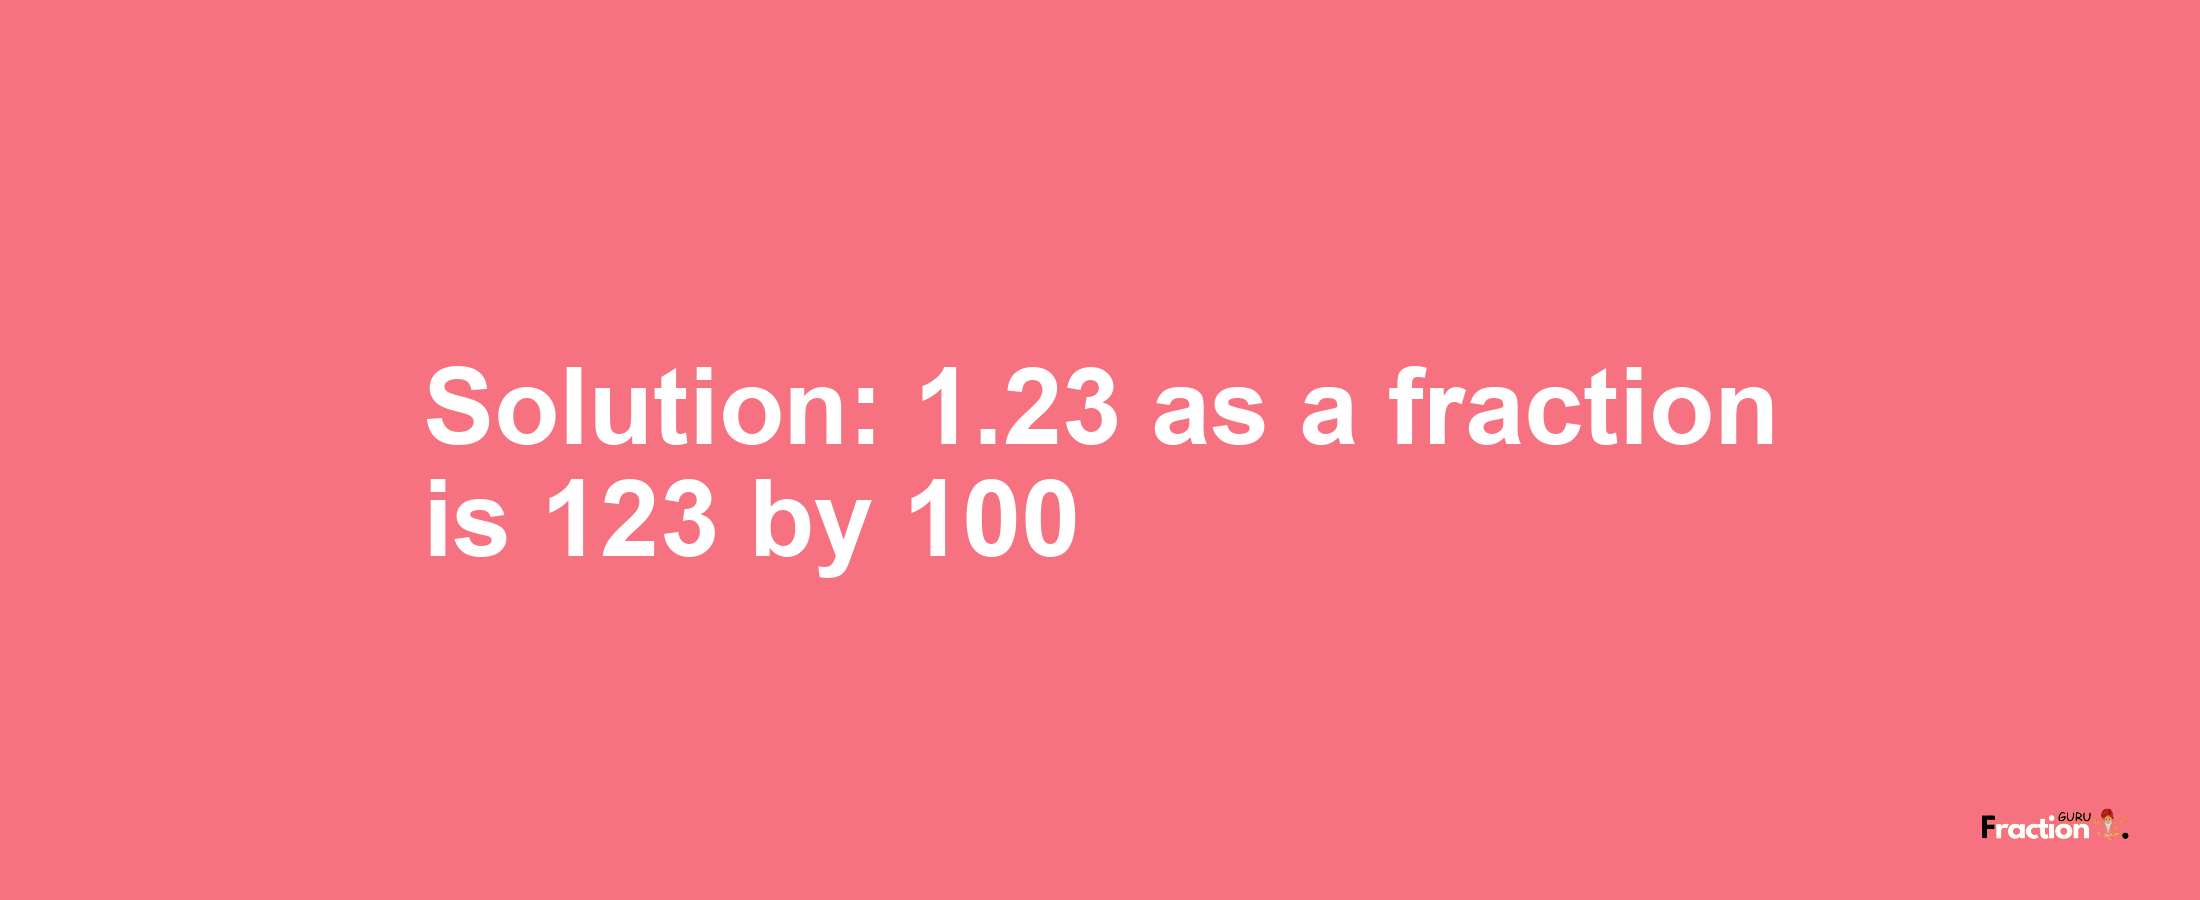 Solution:1.23 as a fraction is 123/100